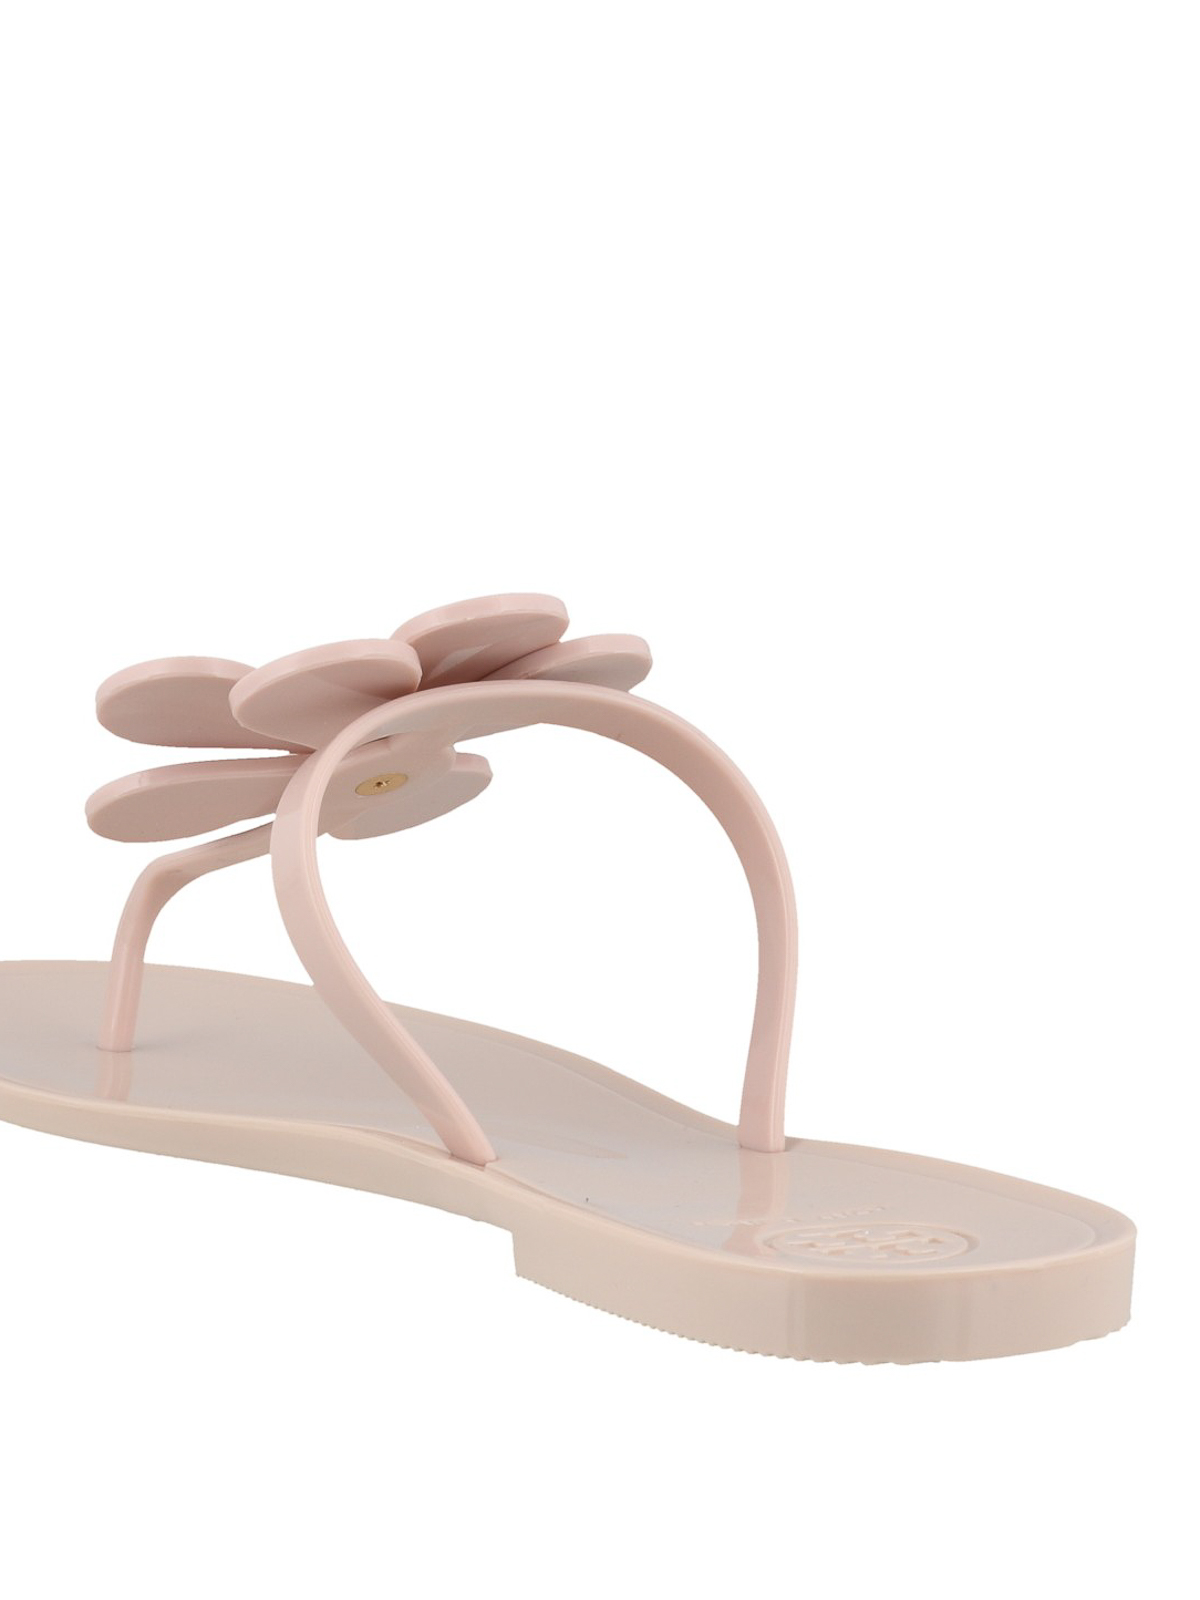 Tory Burch Flower Jelly Sandals in Pink